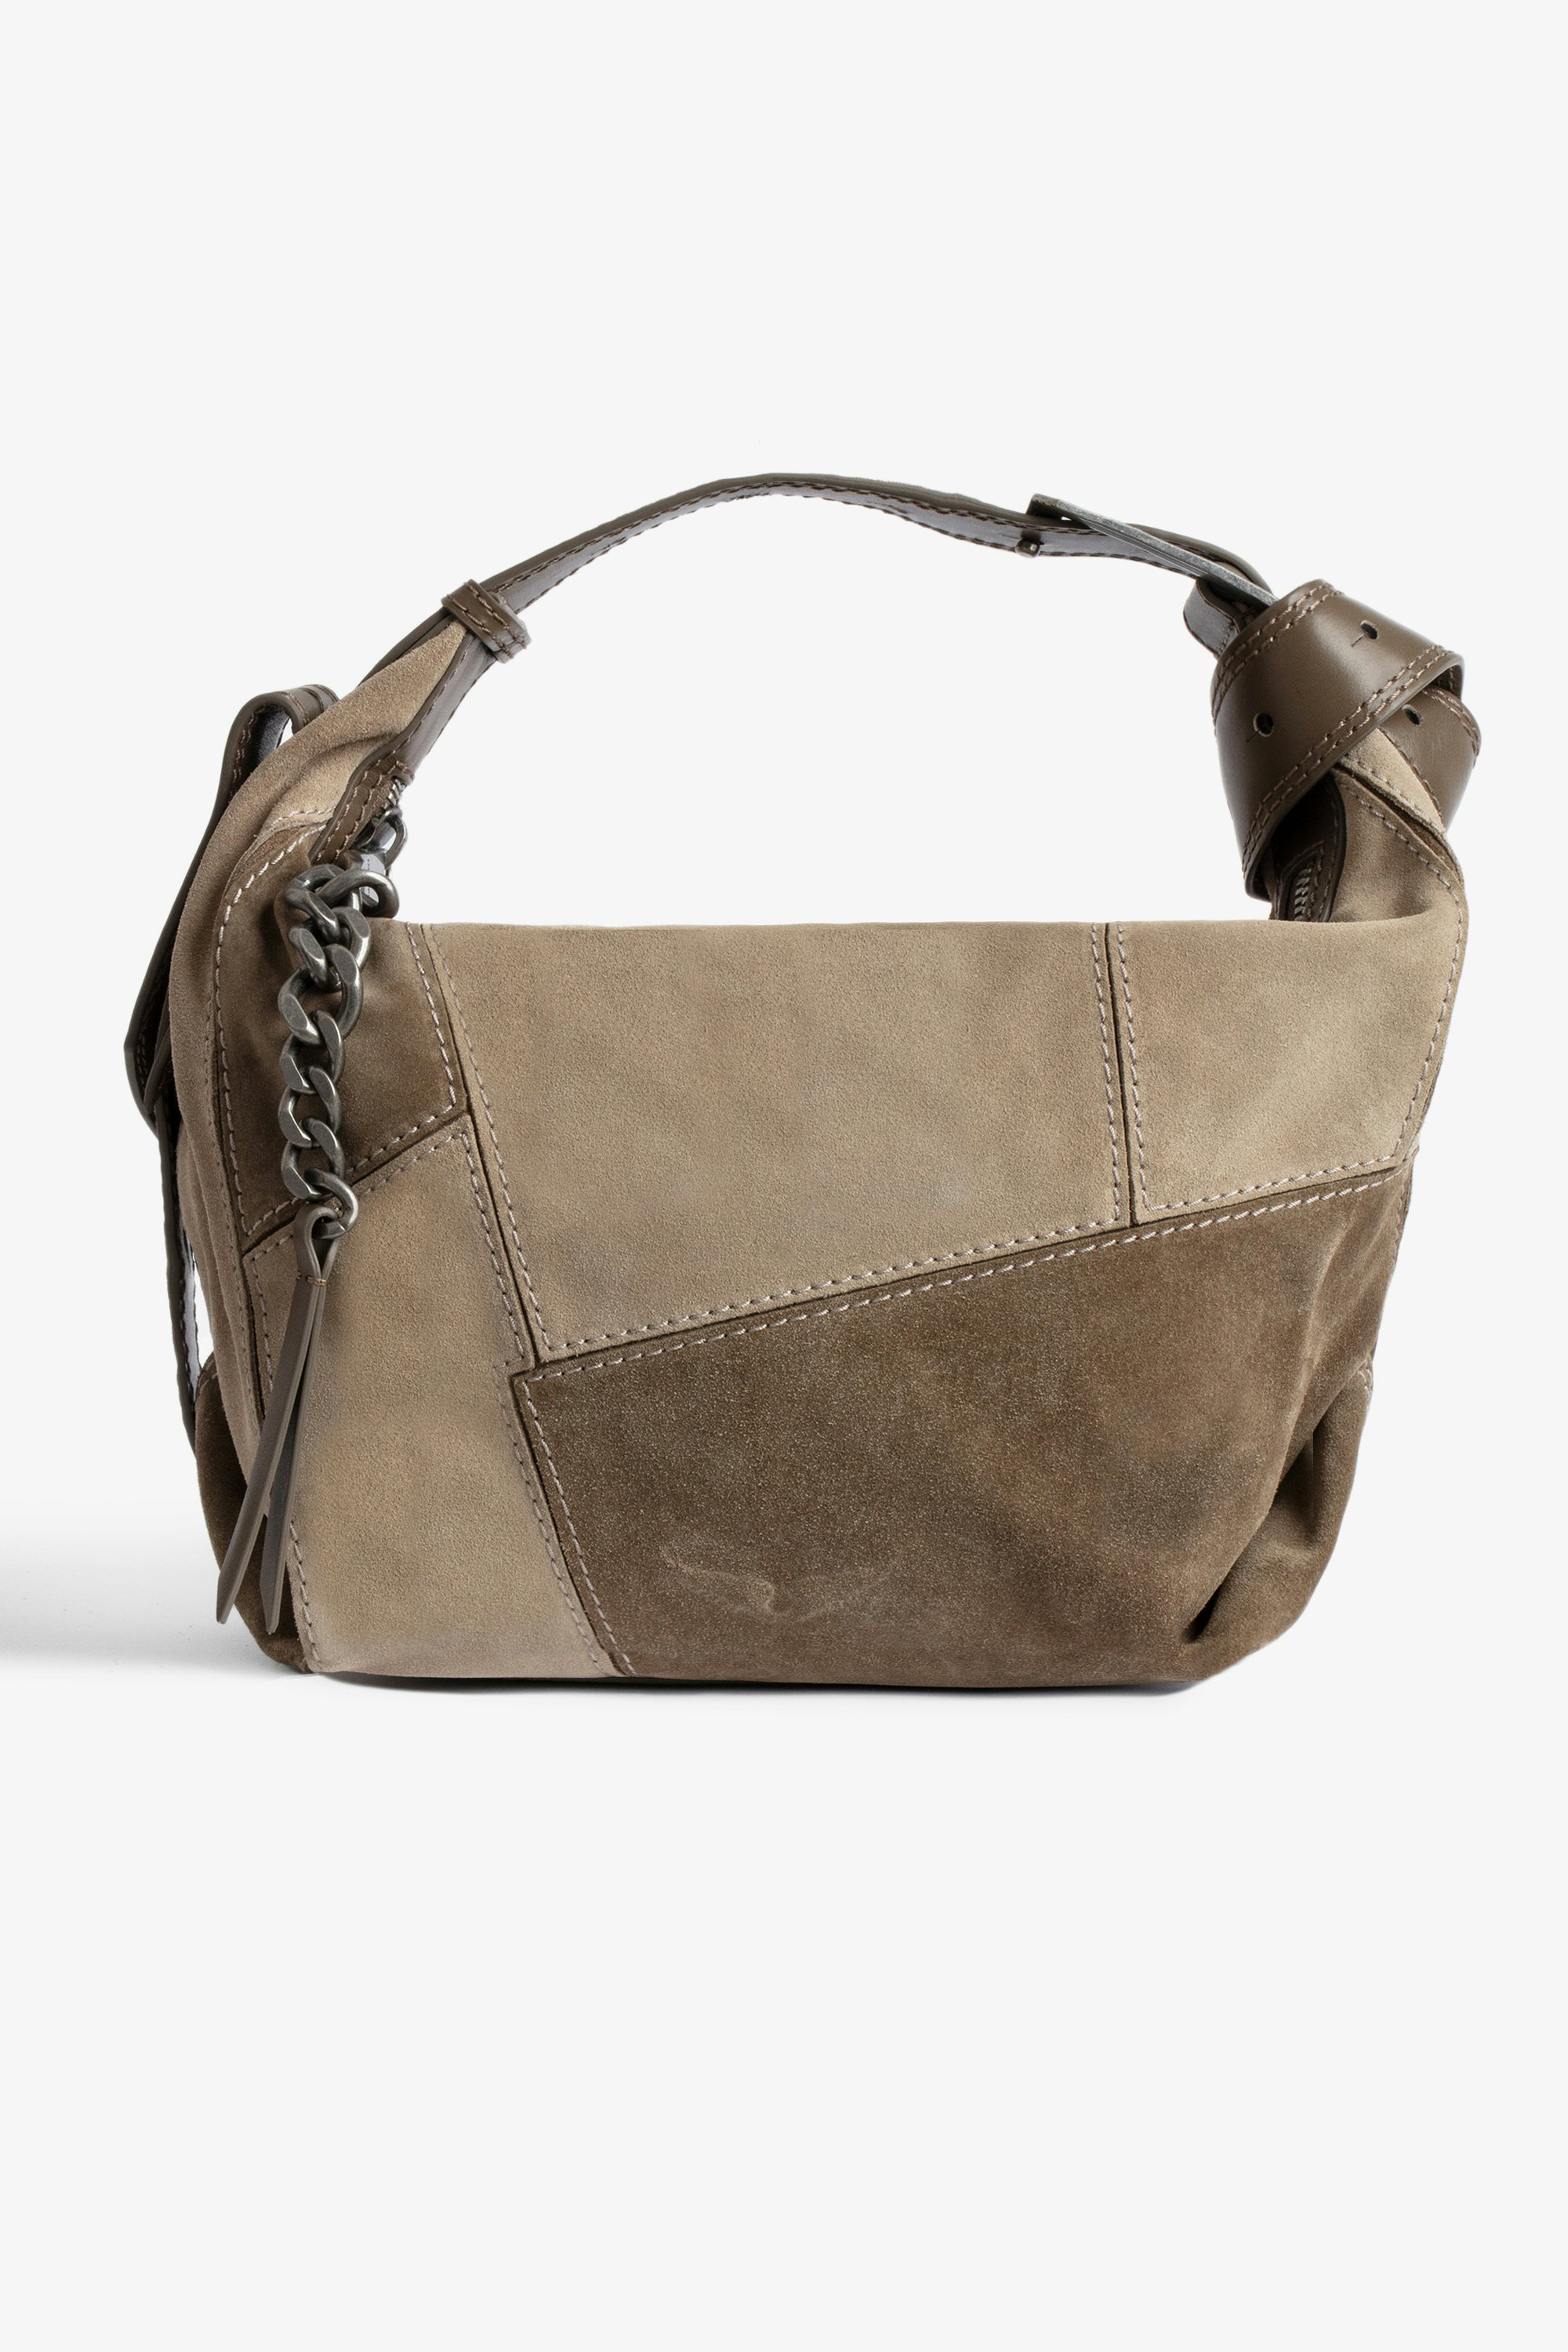 Le Cecilia Suede Patchwork Bag - Women’s bag worn over the shoulder or across the body in patchwork of beige suede